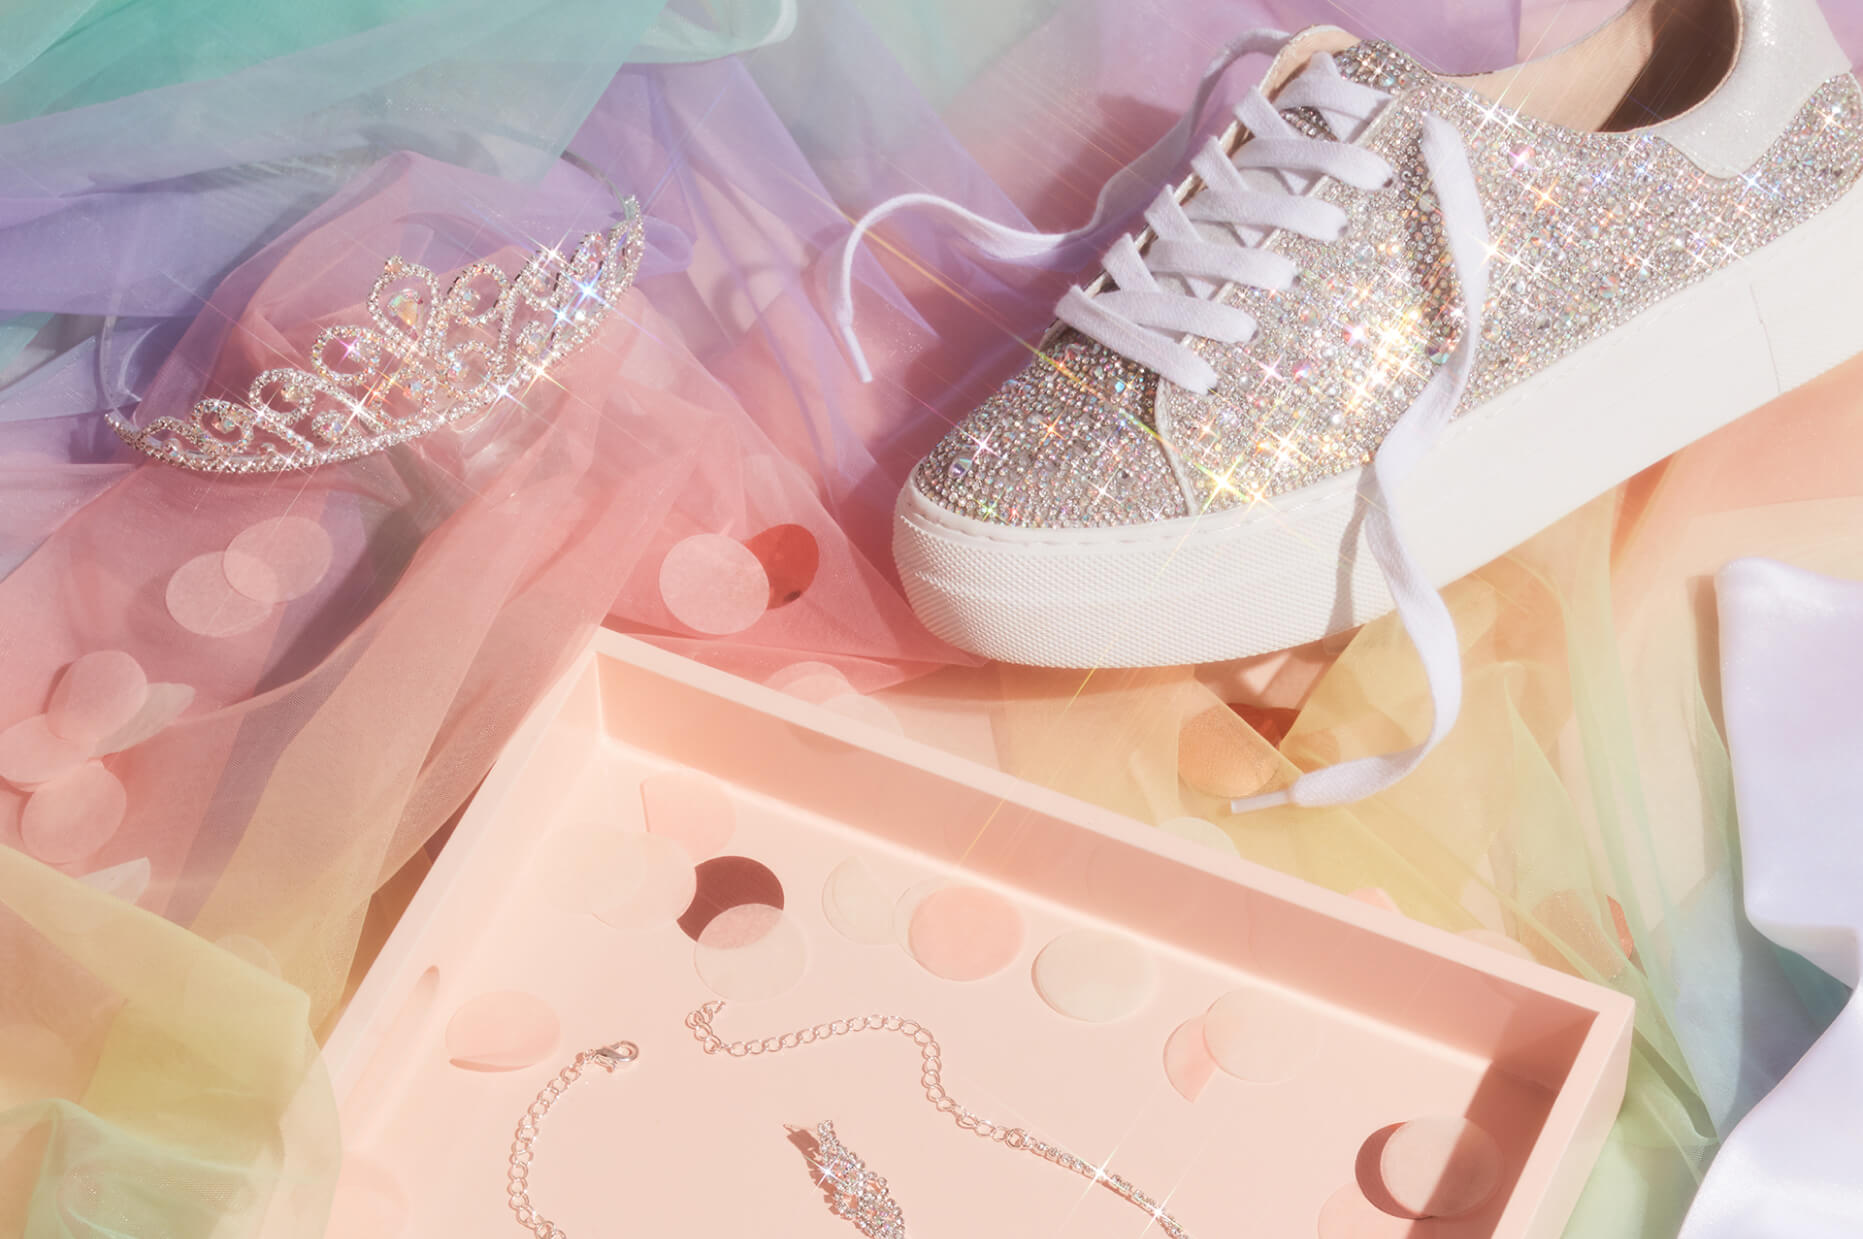 sparkly sneakers, tiara, and jewelry box laid out on top of multi colored tulle